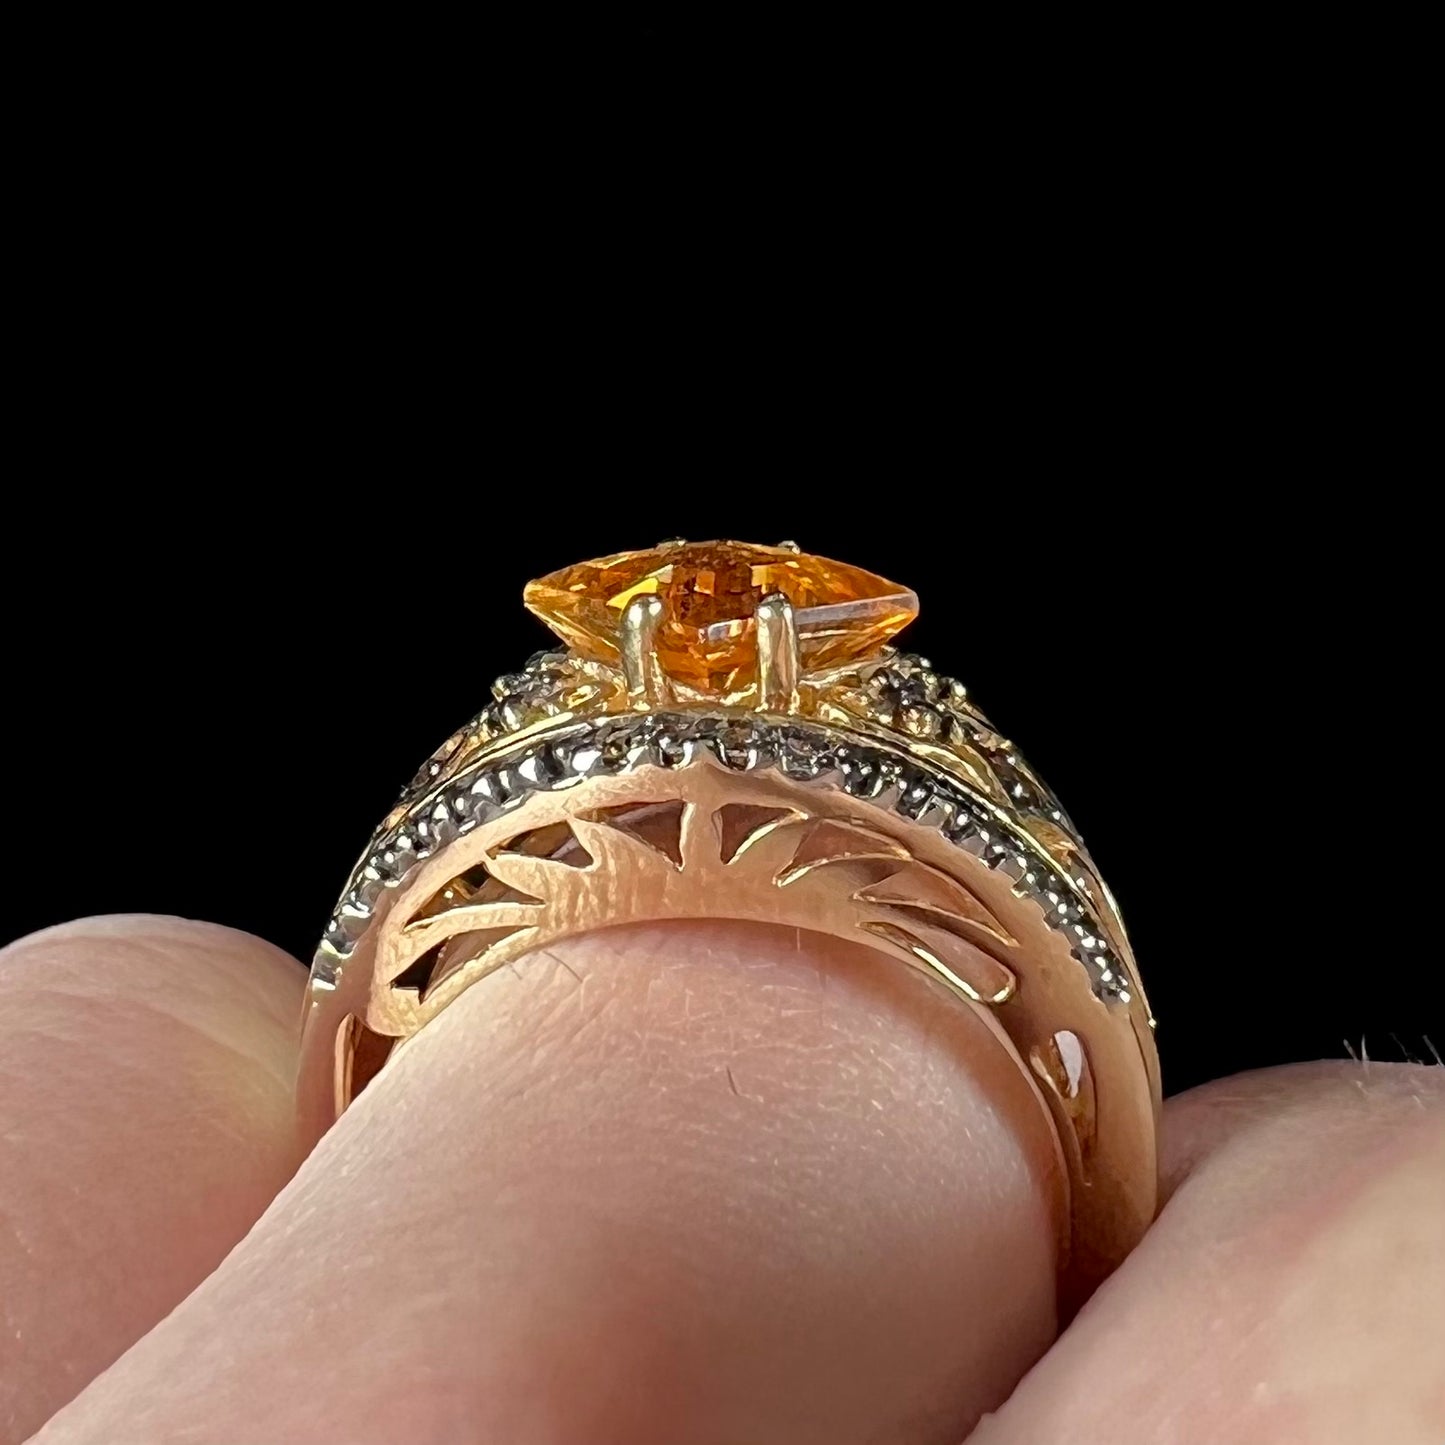 A square cut citrine and chocolate diamond filigree ring with andalusite accents.